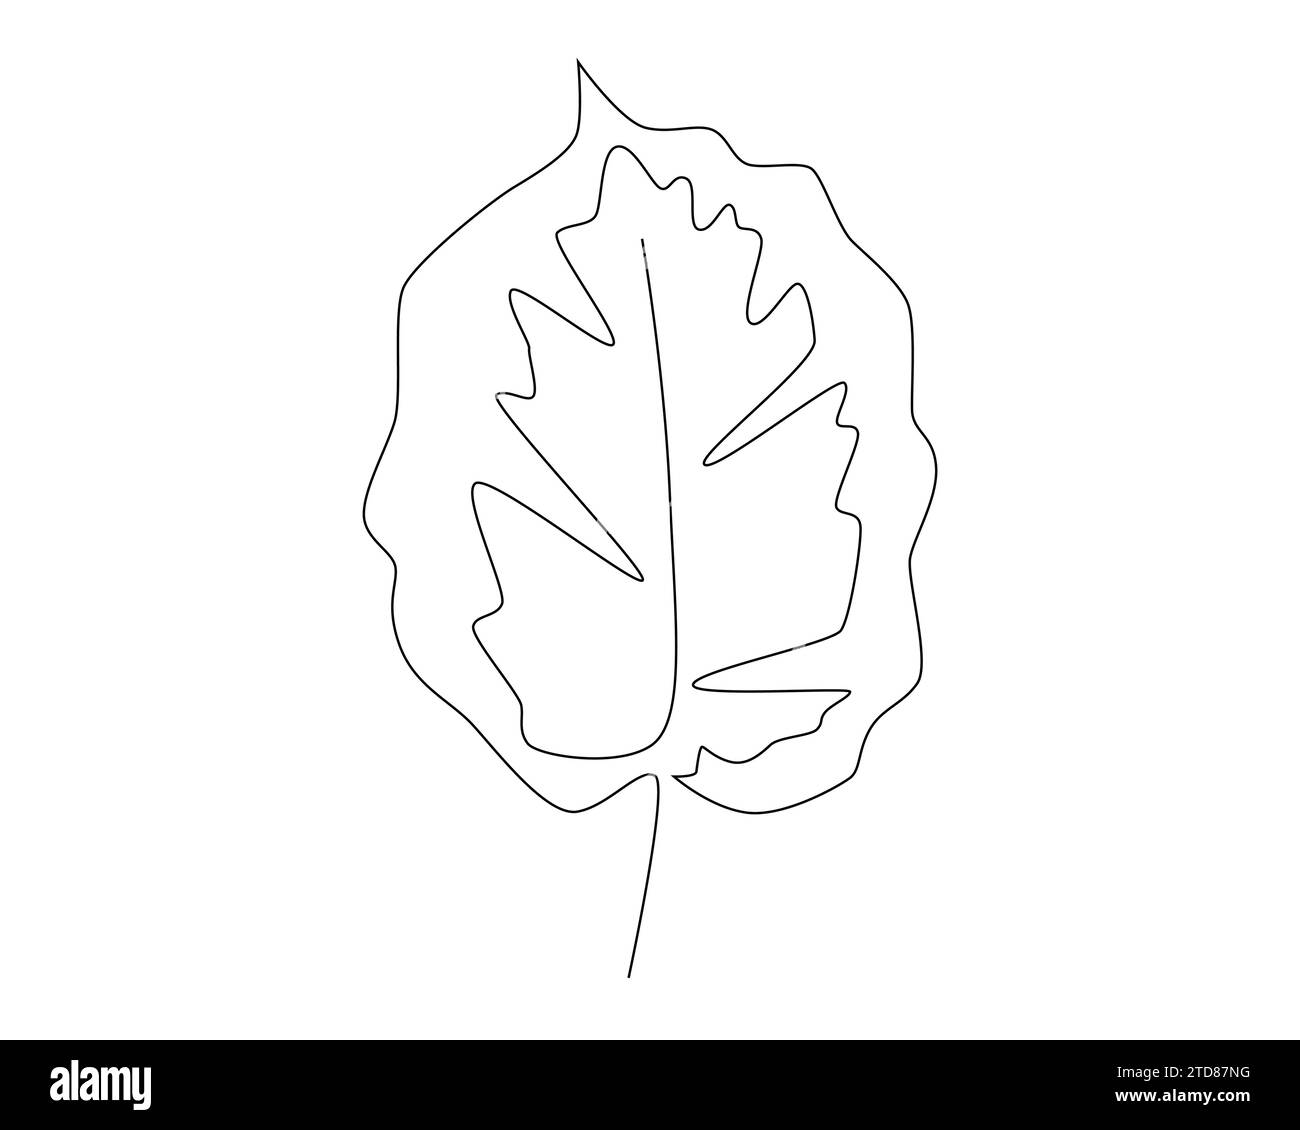 Continuous one simple single abstract line drawing of leaf icon vector illustration concept Stock Vector